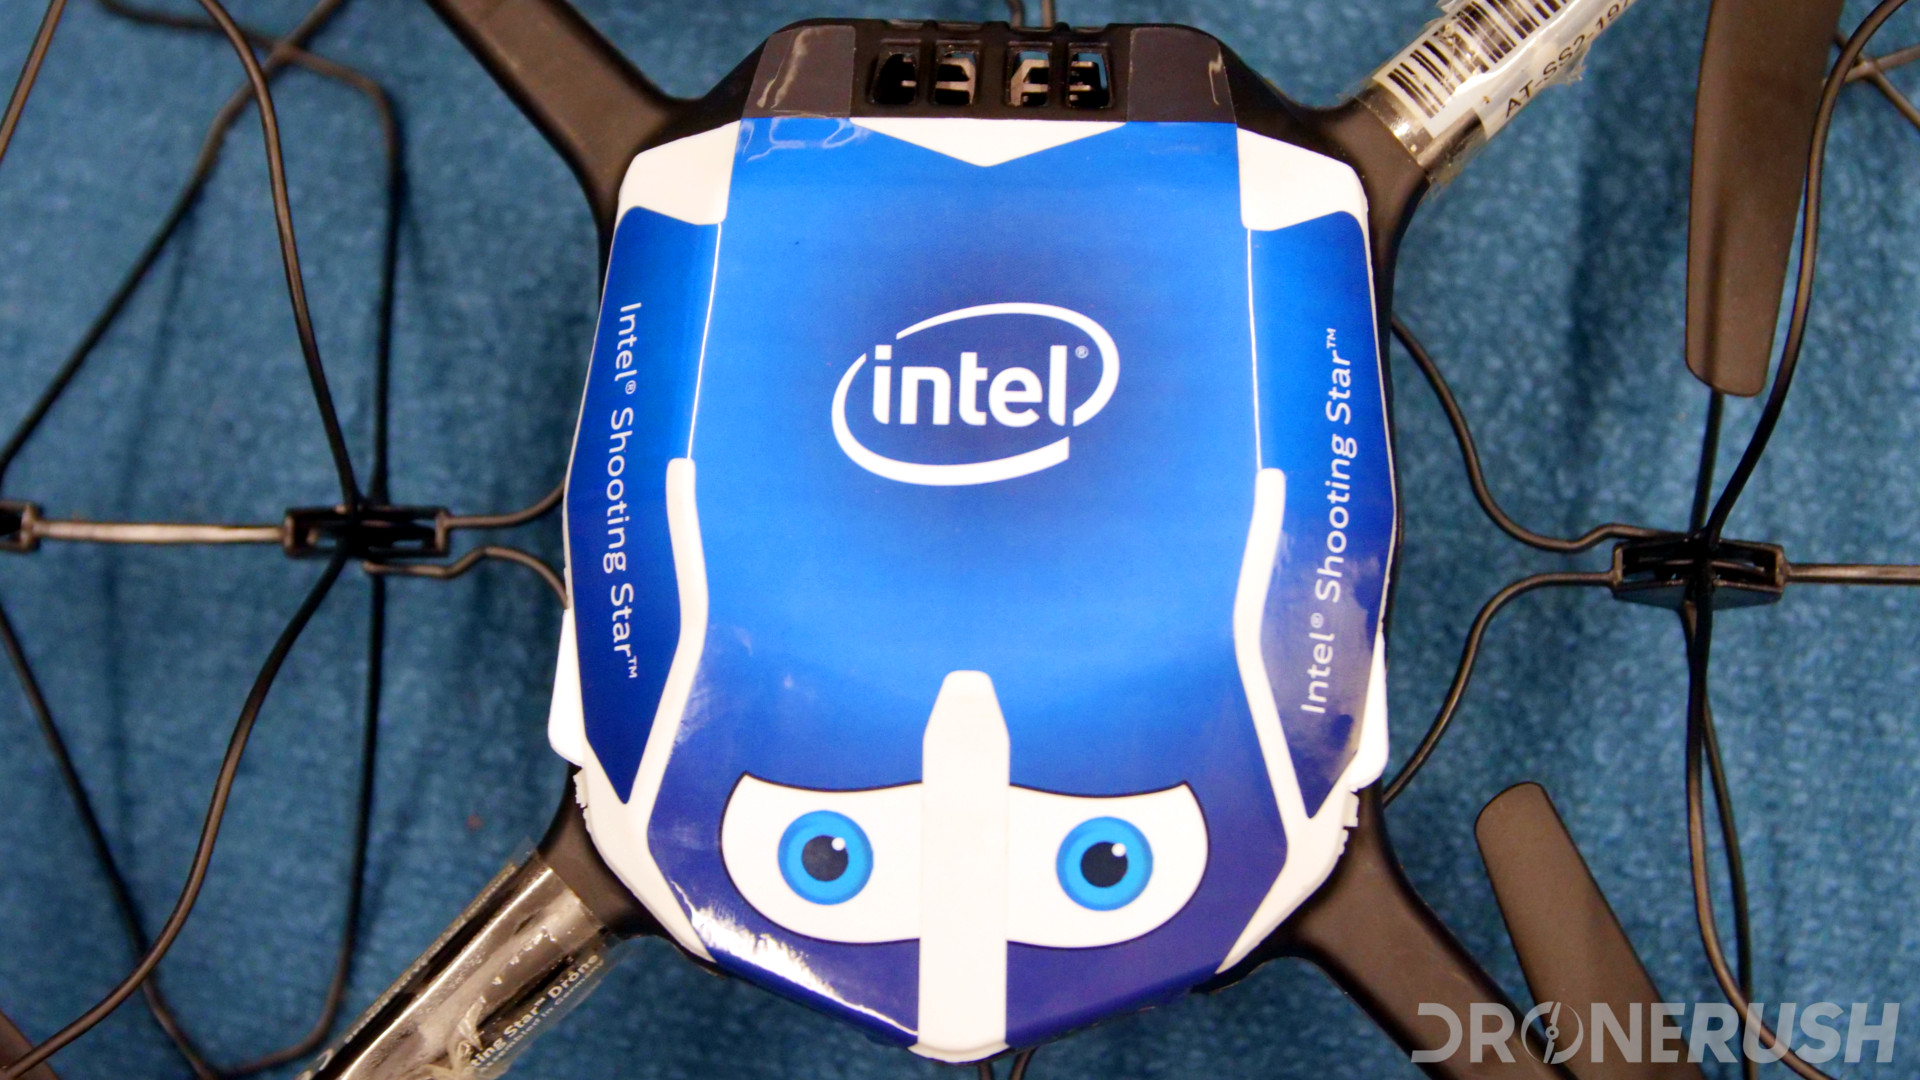 Photo of the Intel Shooting Star drone at the Girls Who Drone event in San Francisco.